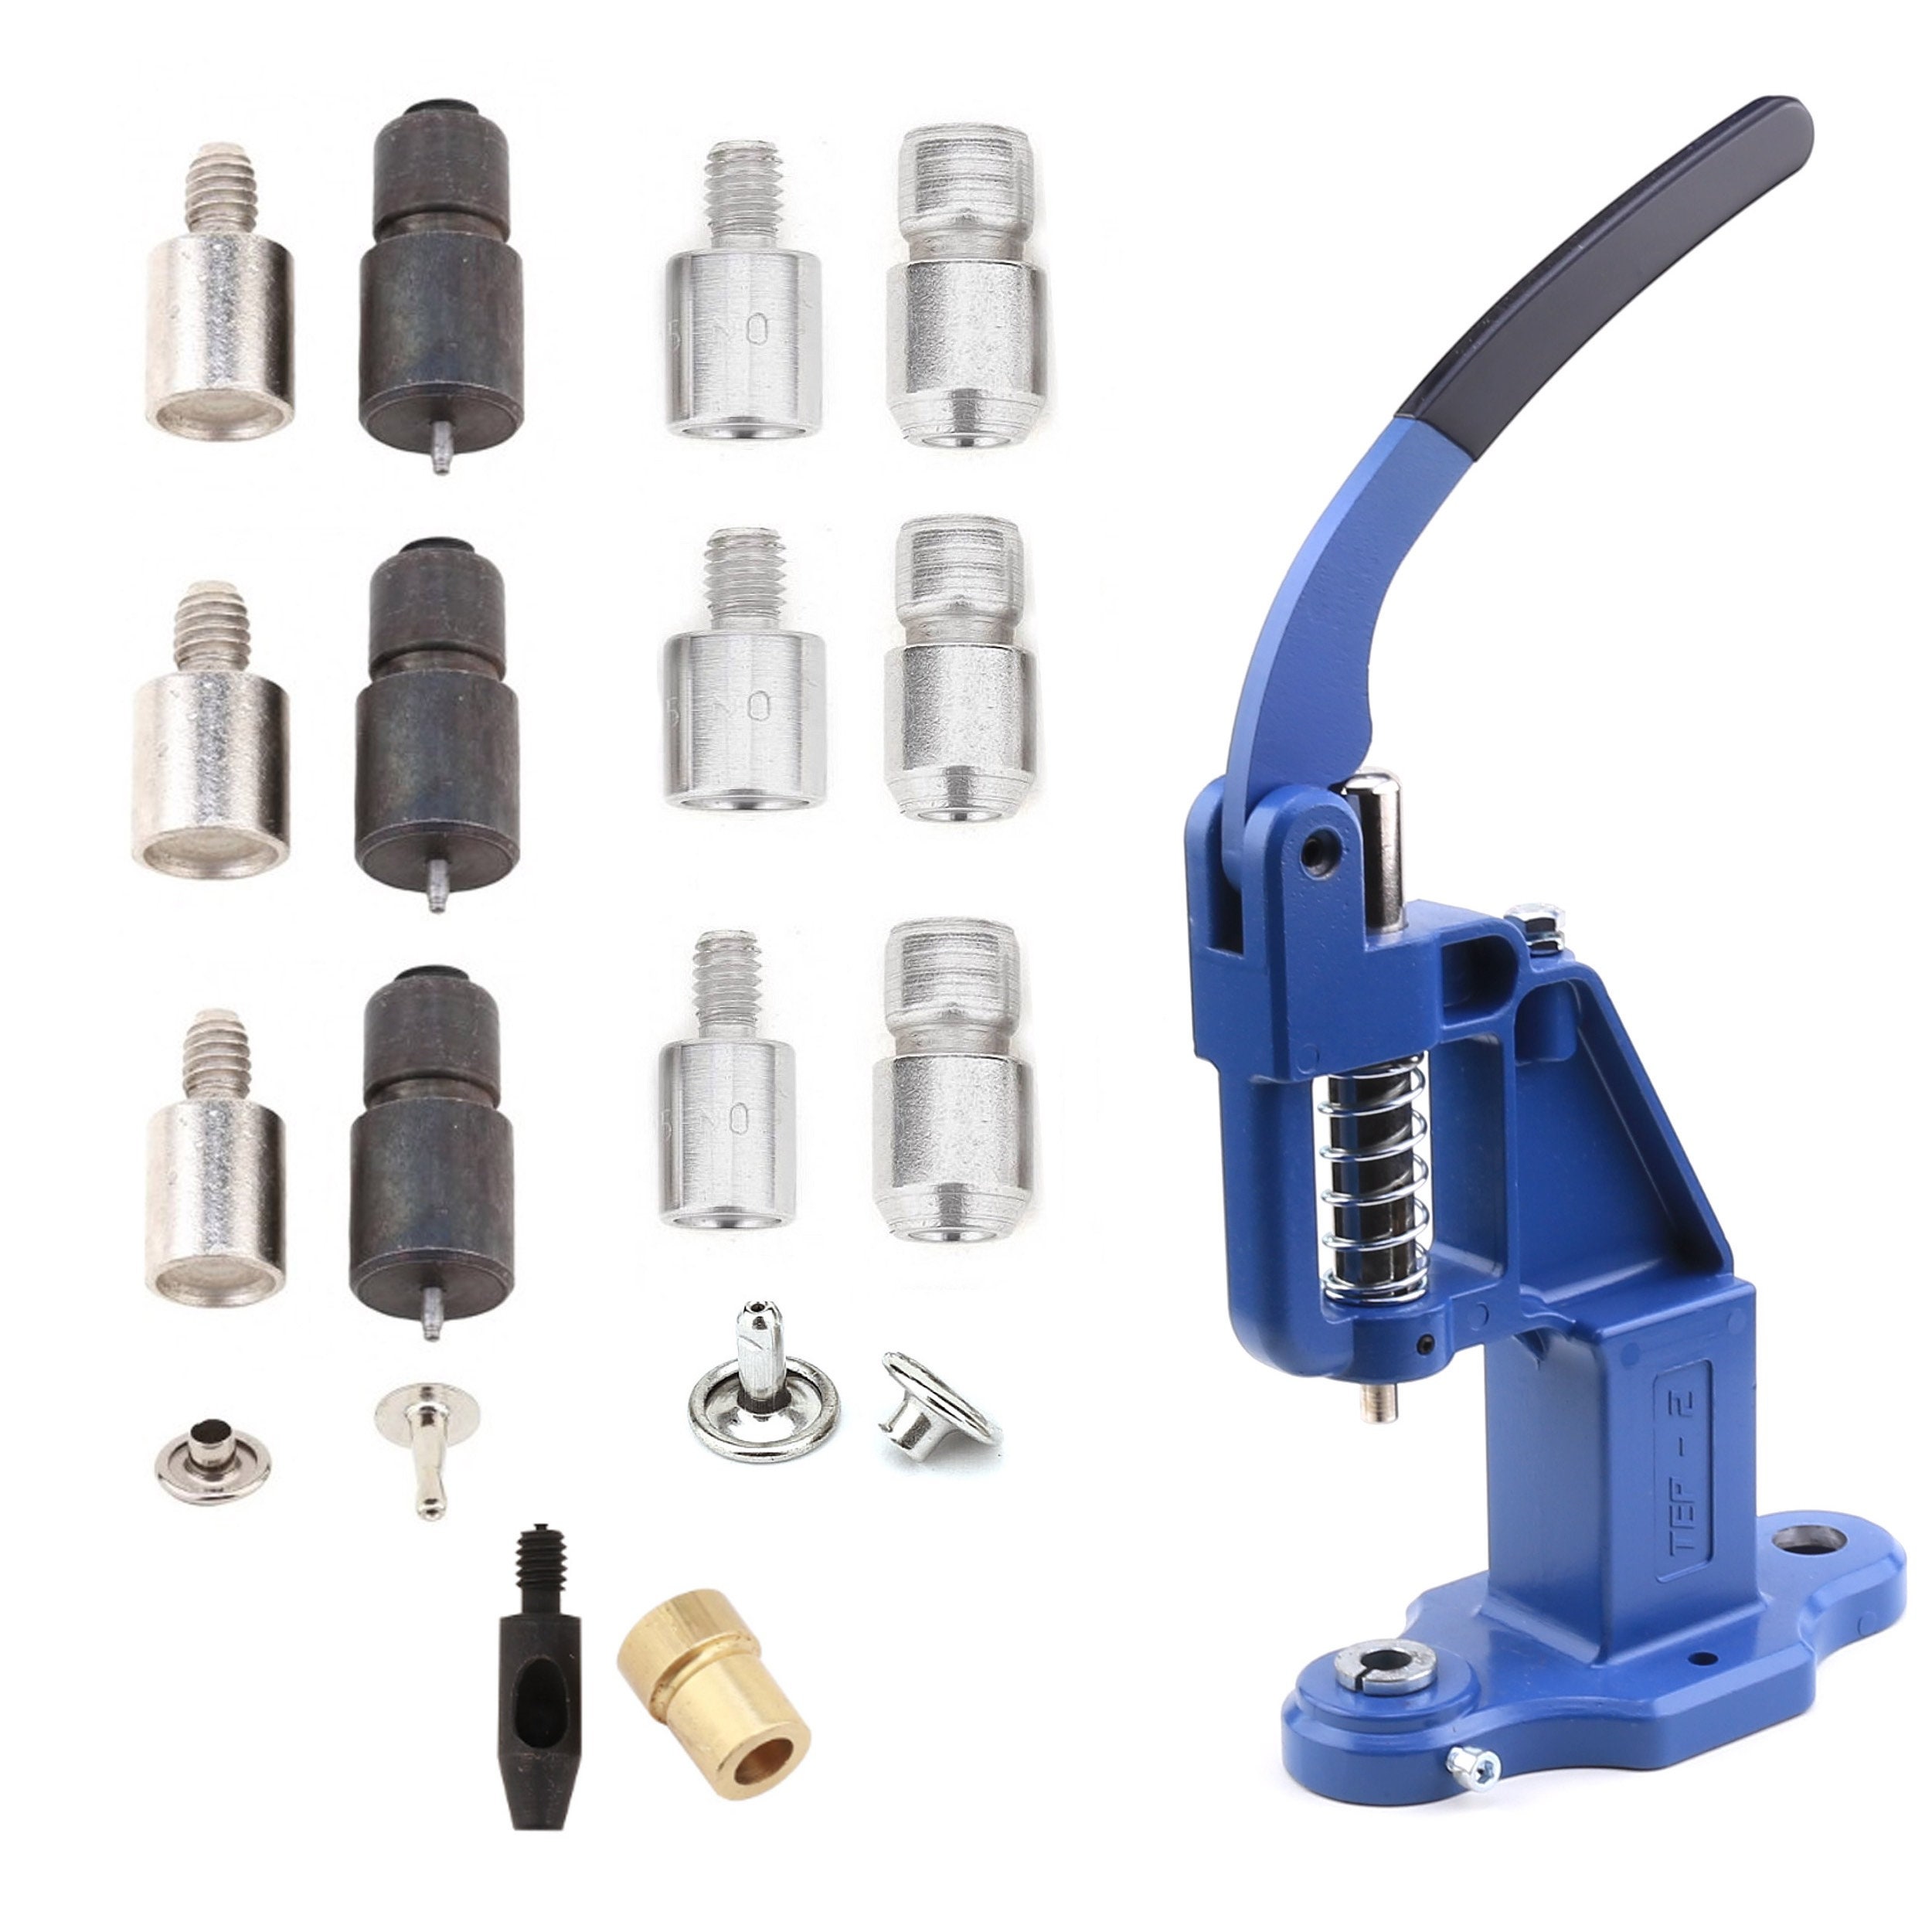 Snap Fastener Kit With 20 Snaps and Setting Tool for Thinner